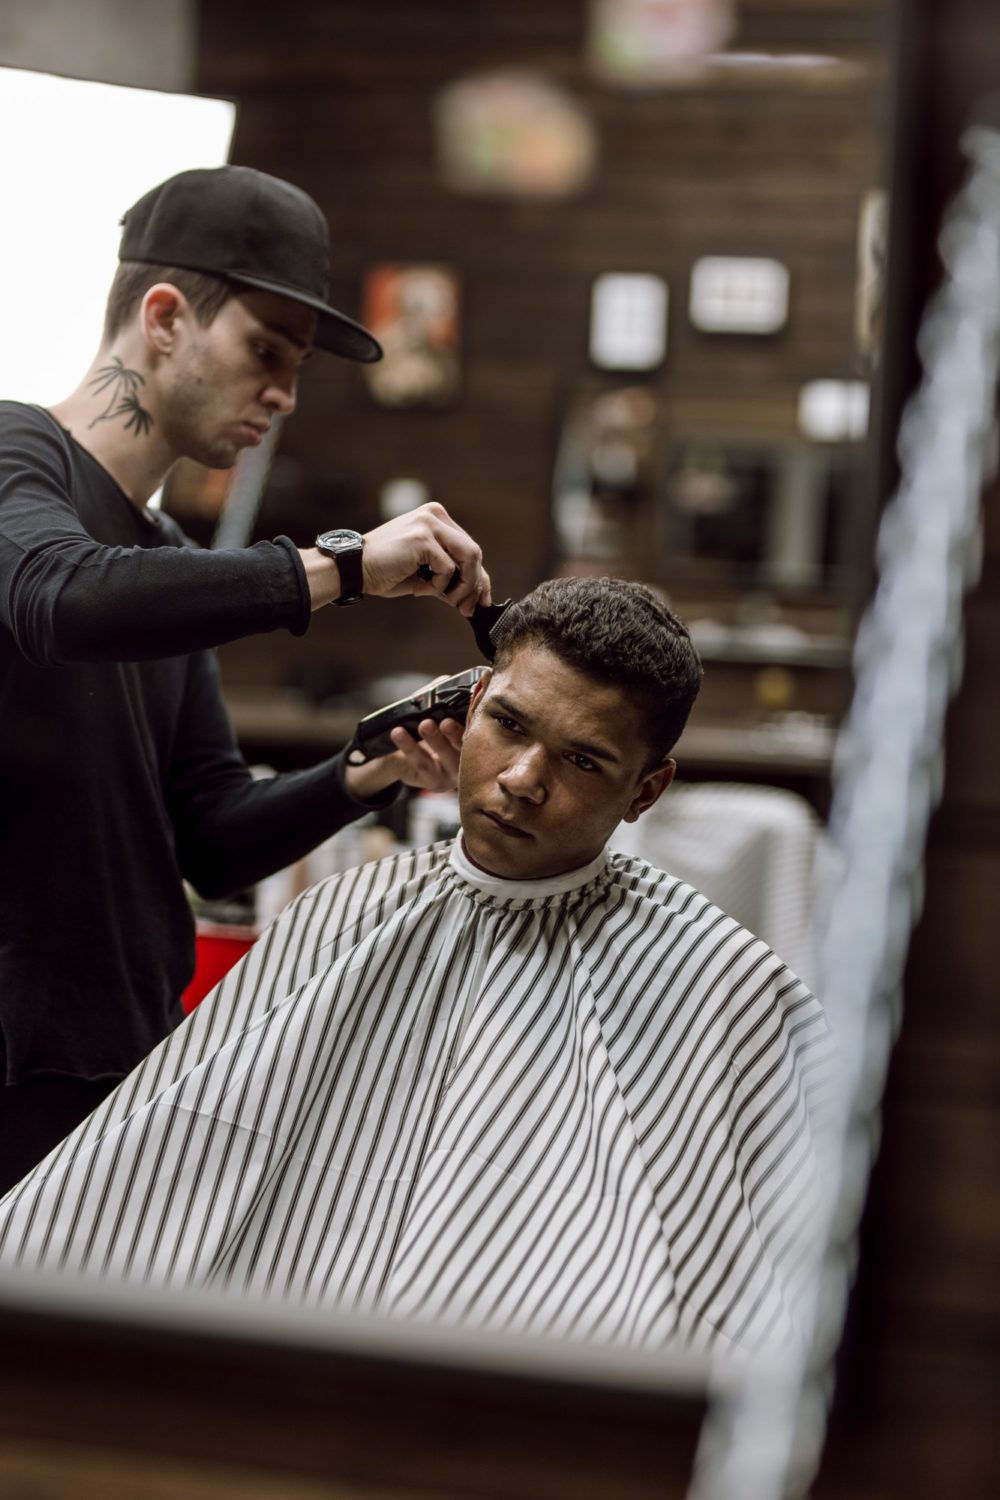 The barber dressed in black clothes makes a razor cut hair back and sides for a stylish man sitting